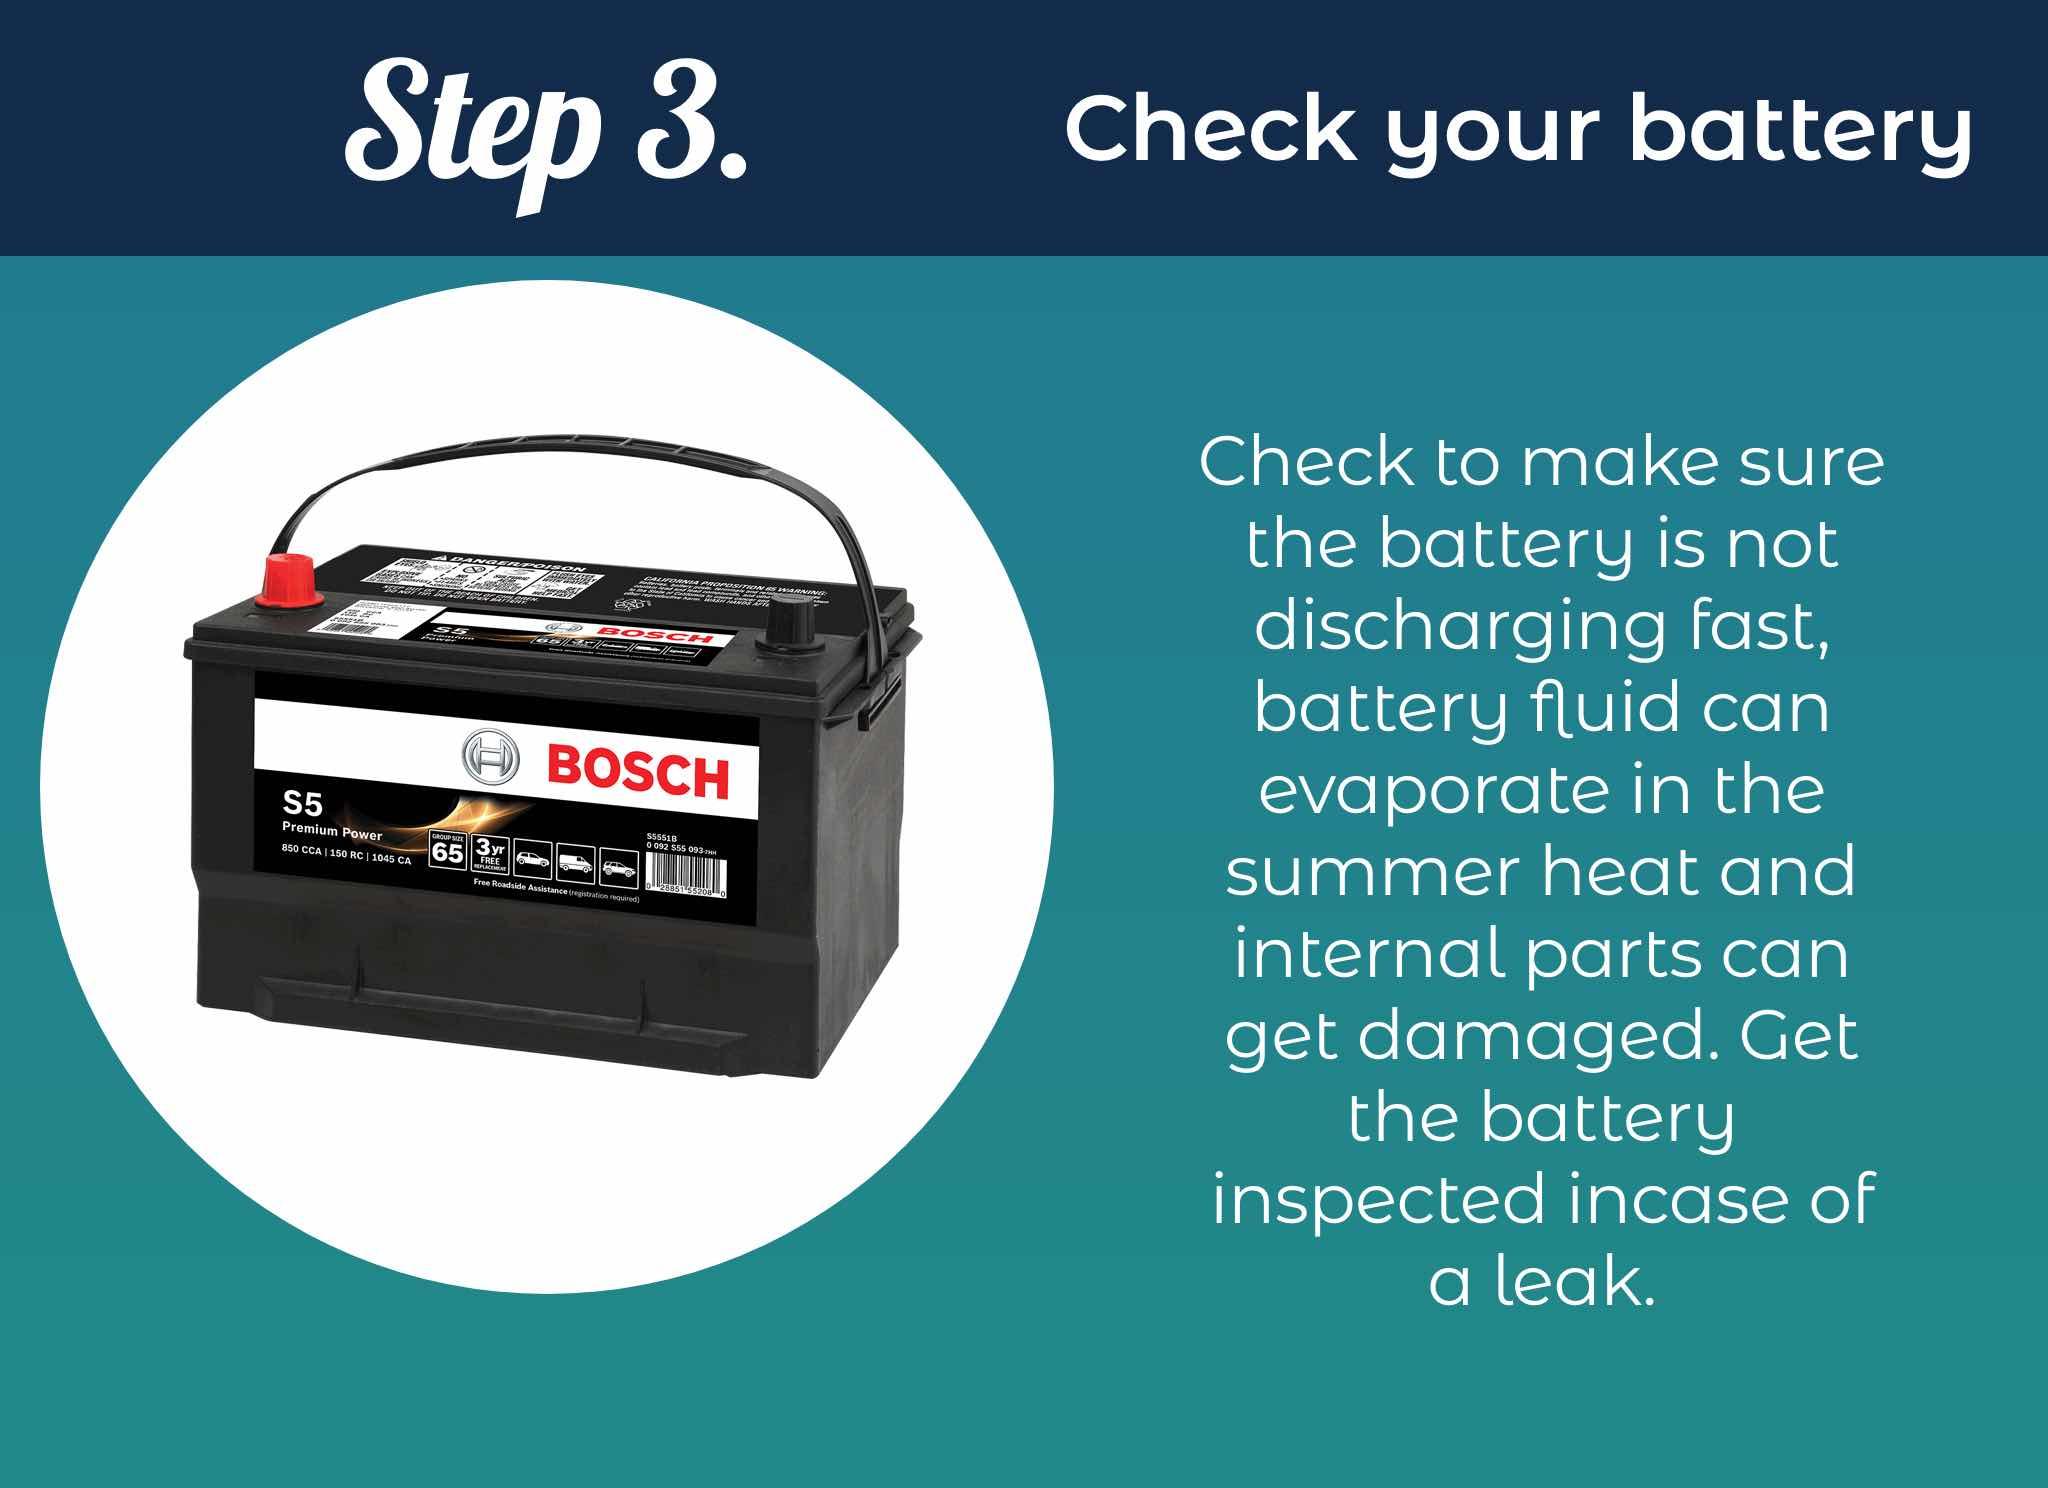 Check to make sure the battery is not discharging fast, battery fluid can evaporate in the summer heat and internal parts can get damaged. Get the battery inspected in case of a leak.